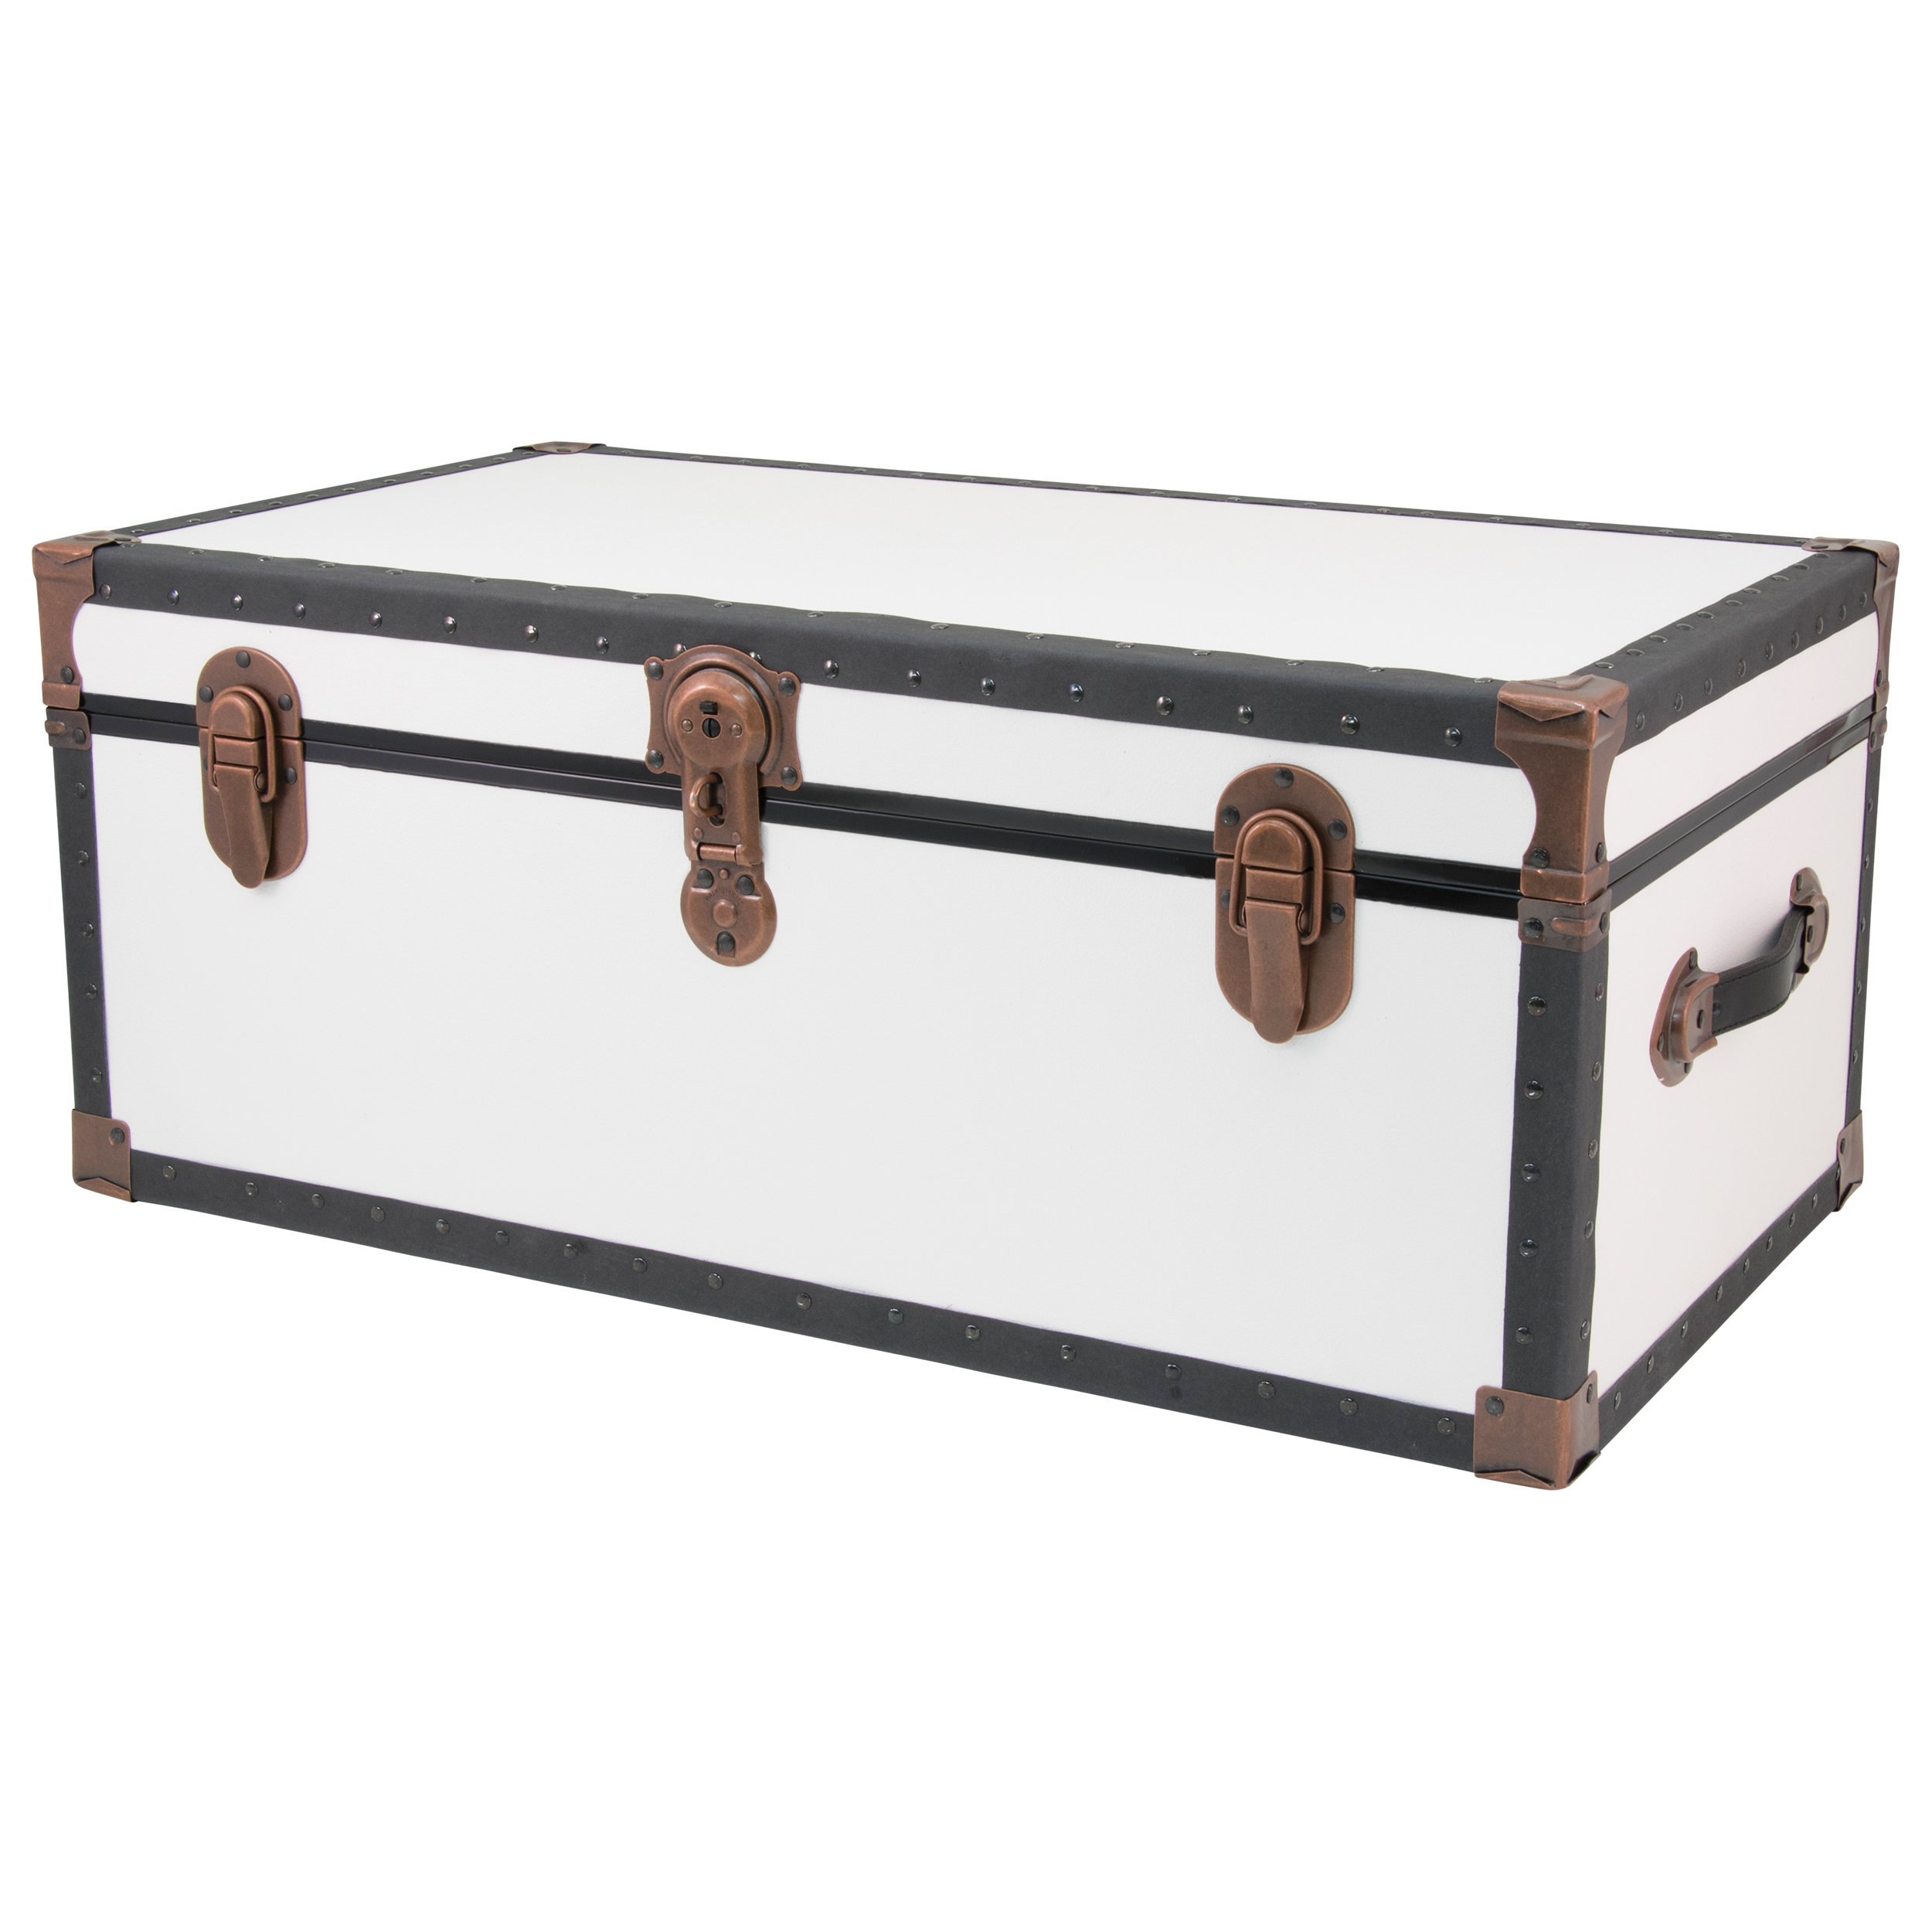 Seward Trunks 25 Gallon Wood, Plastic and Metal Trunk, White - image 4 of 8